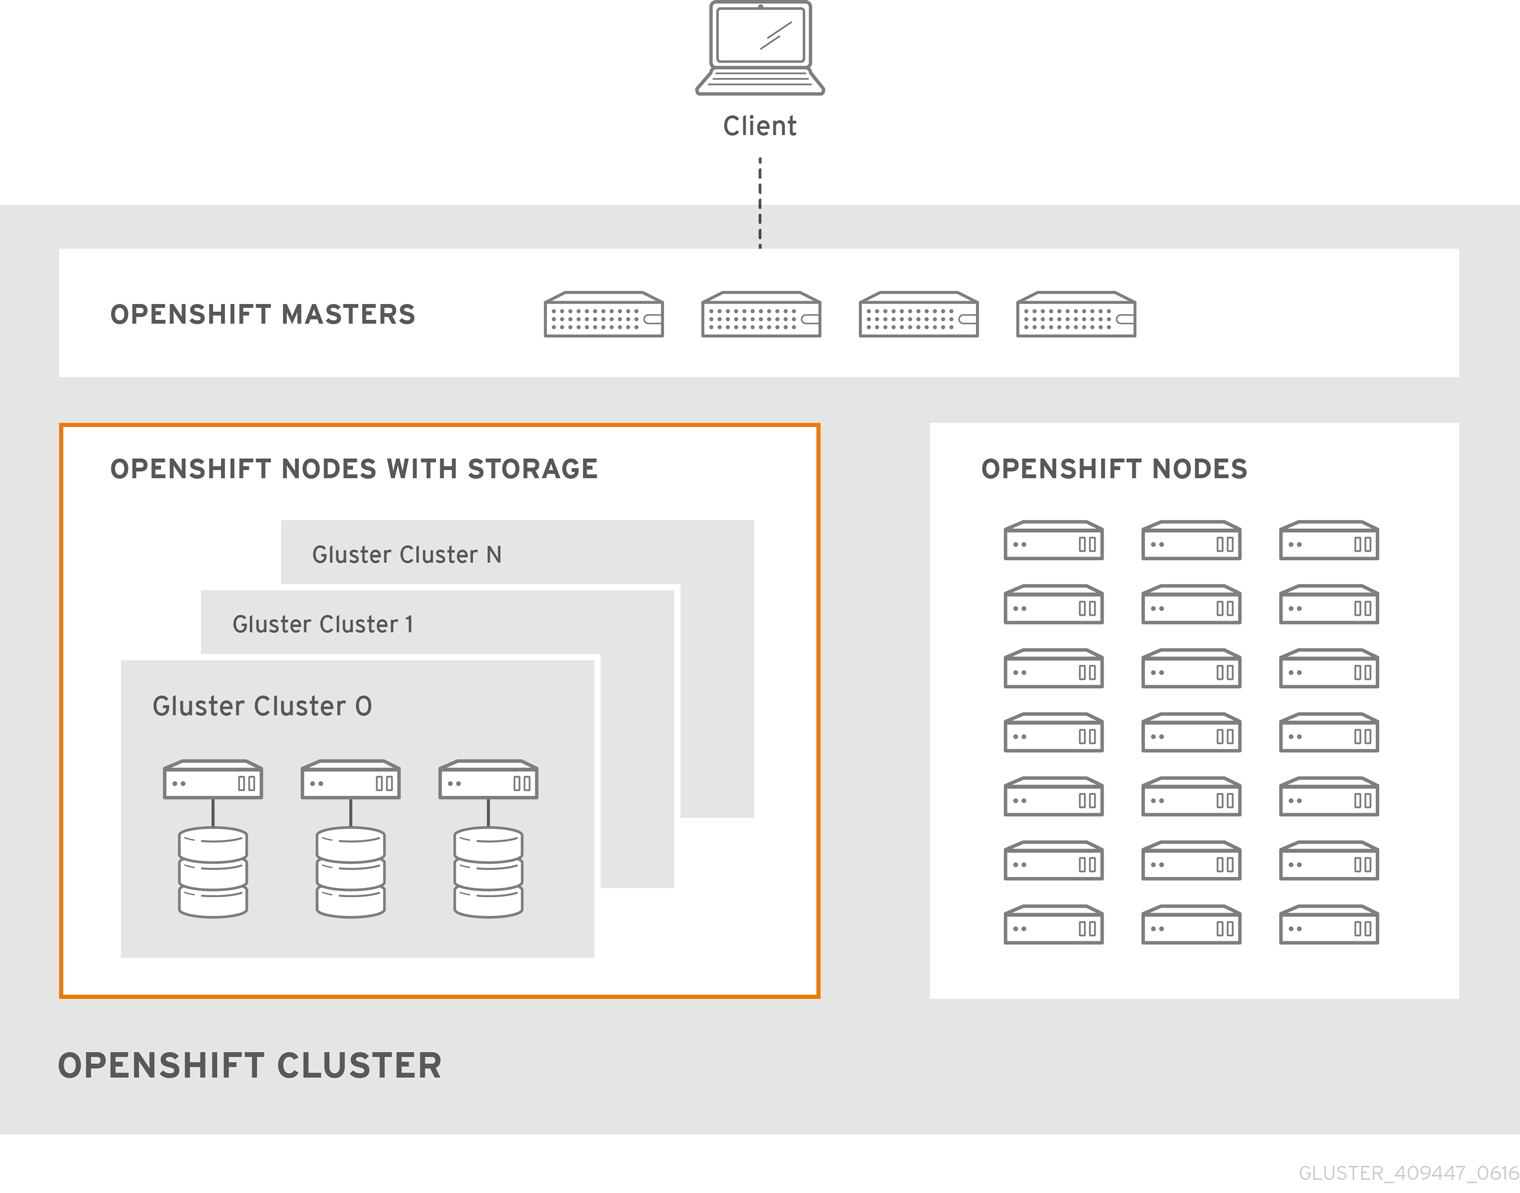 Architecture - Red Hat Gluster Storage Container Converged with OpenShift